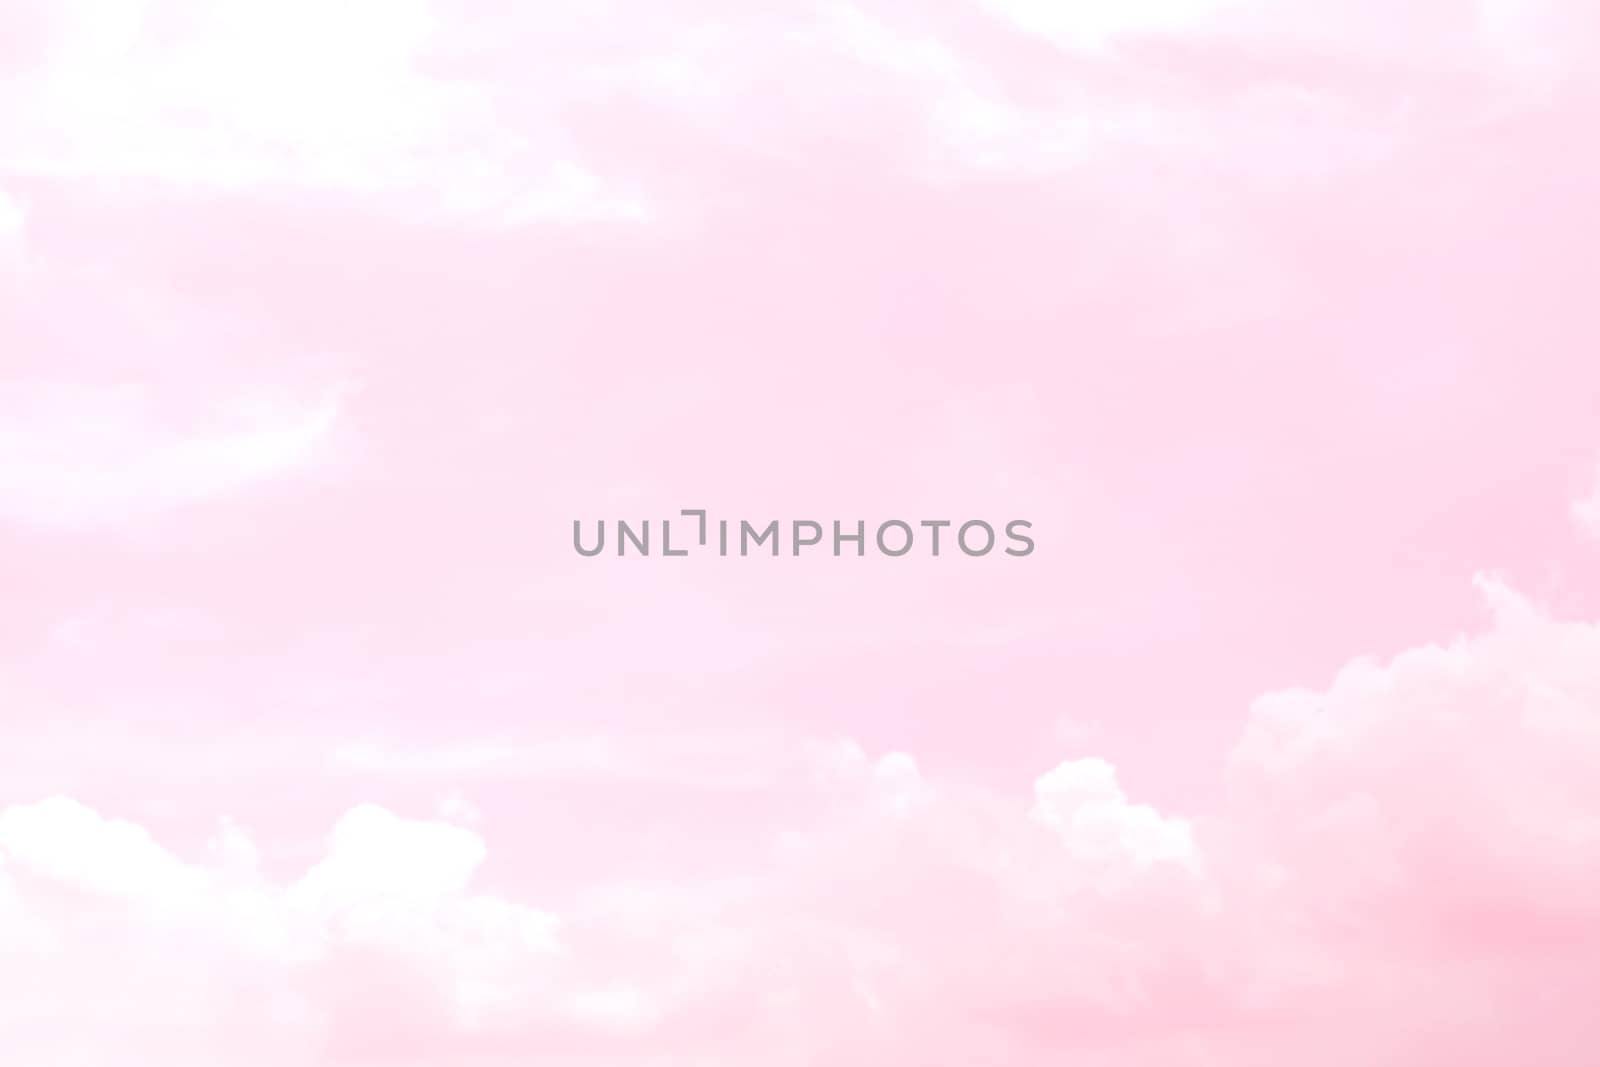 blurred sky soft pink cloud, blur sky pastel pink color soft background, love valentine background, pink sky clear soft pastel background, pink soft blur sky wallpaper by cgdeaw